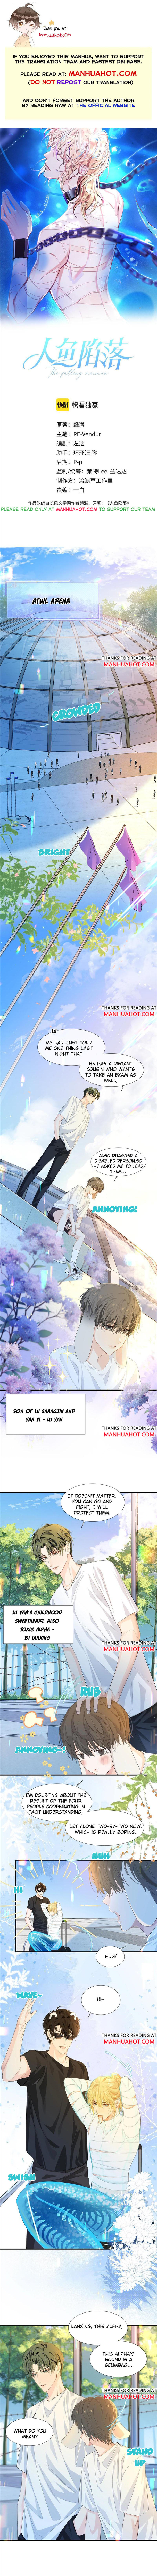 Read A Merman's Affair Chapter 5: A Marriage Of State Is Impossible! on  Mangakakalot